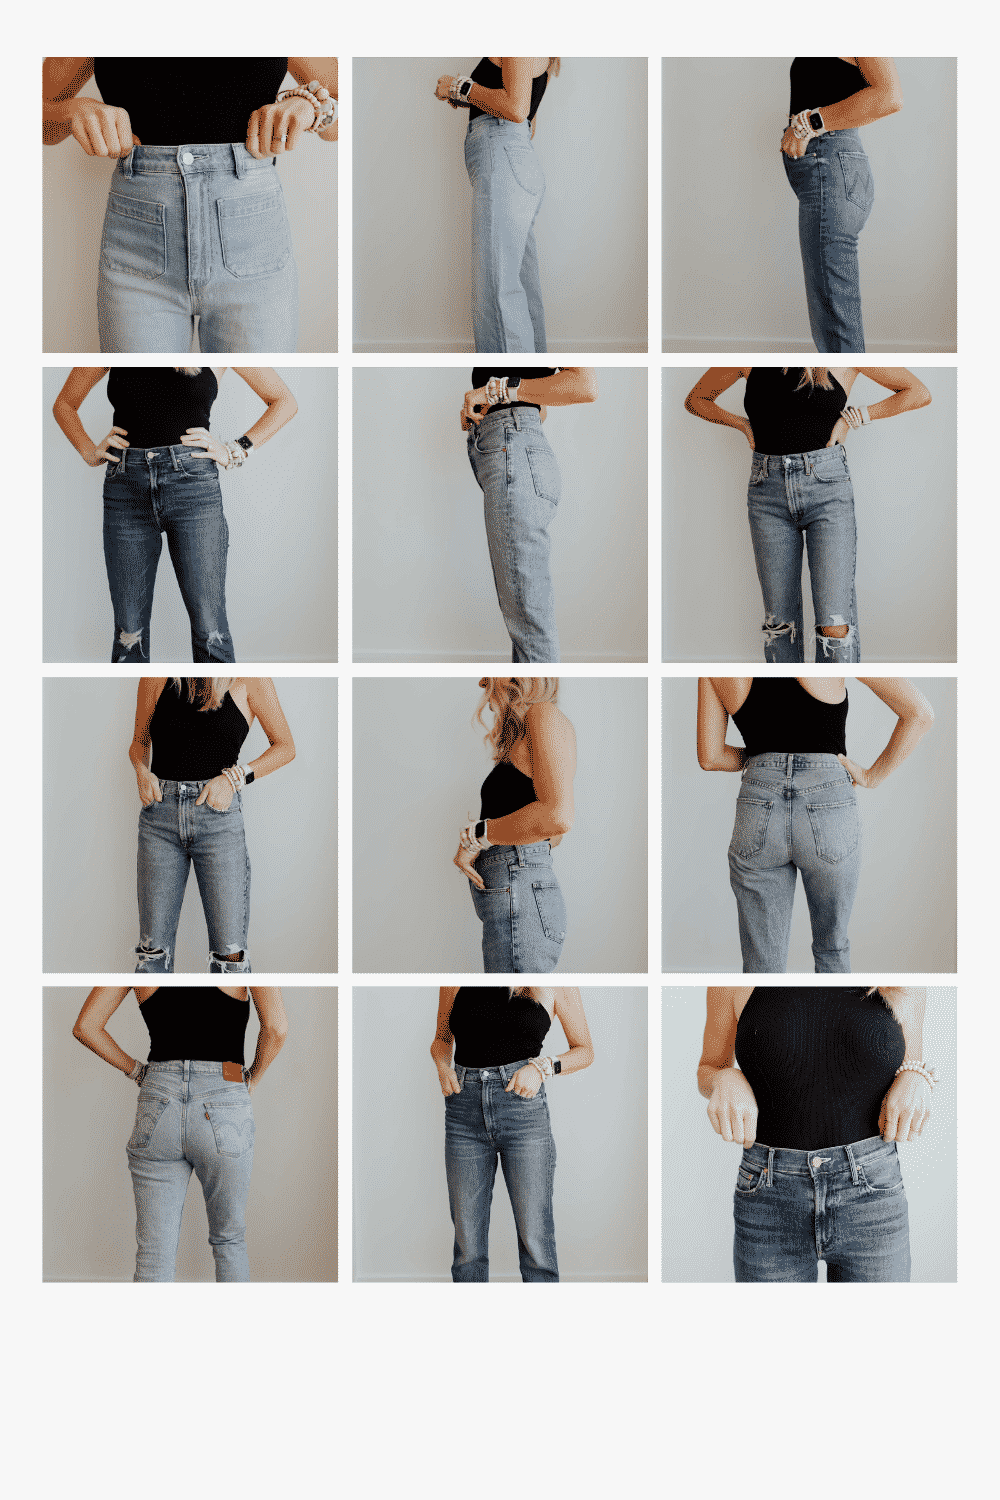 My All Time Favorite Denim - A Mix of Min